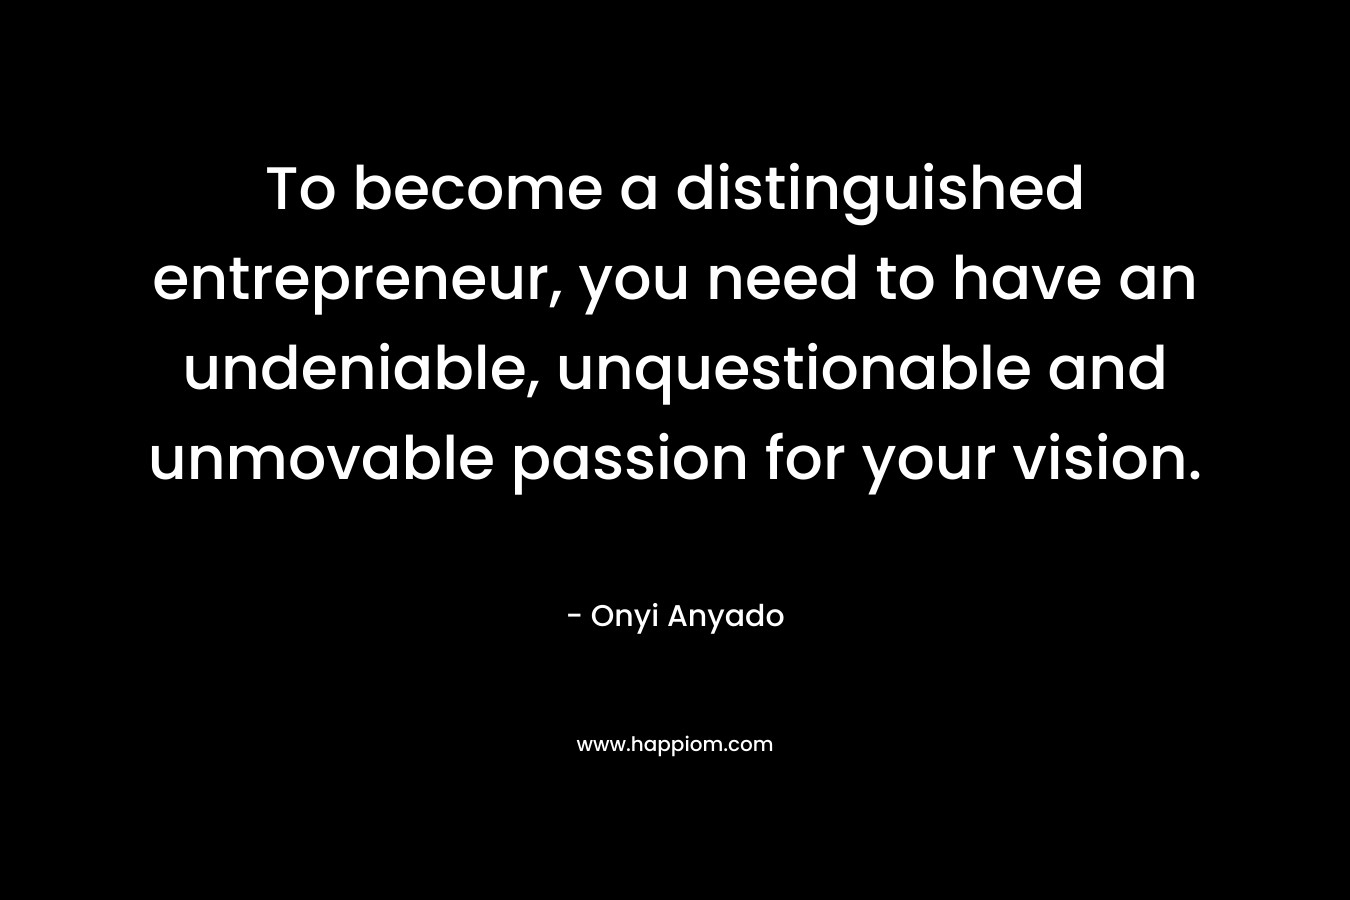 To become a distinguished entrepreneur, you need to have an undeniable, unquestionable and unmovable passion for your vision.